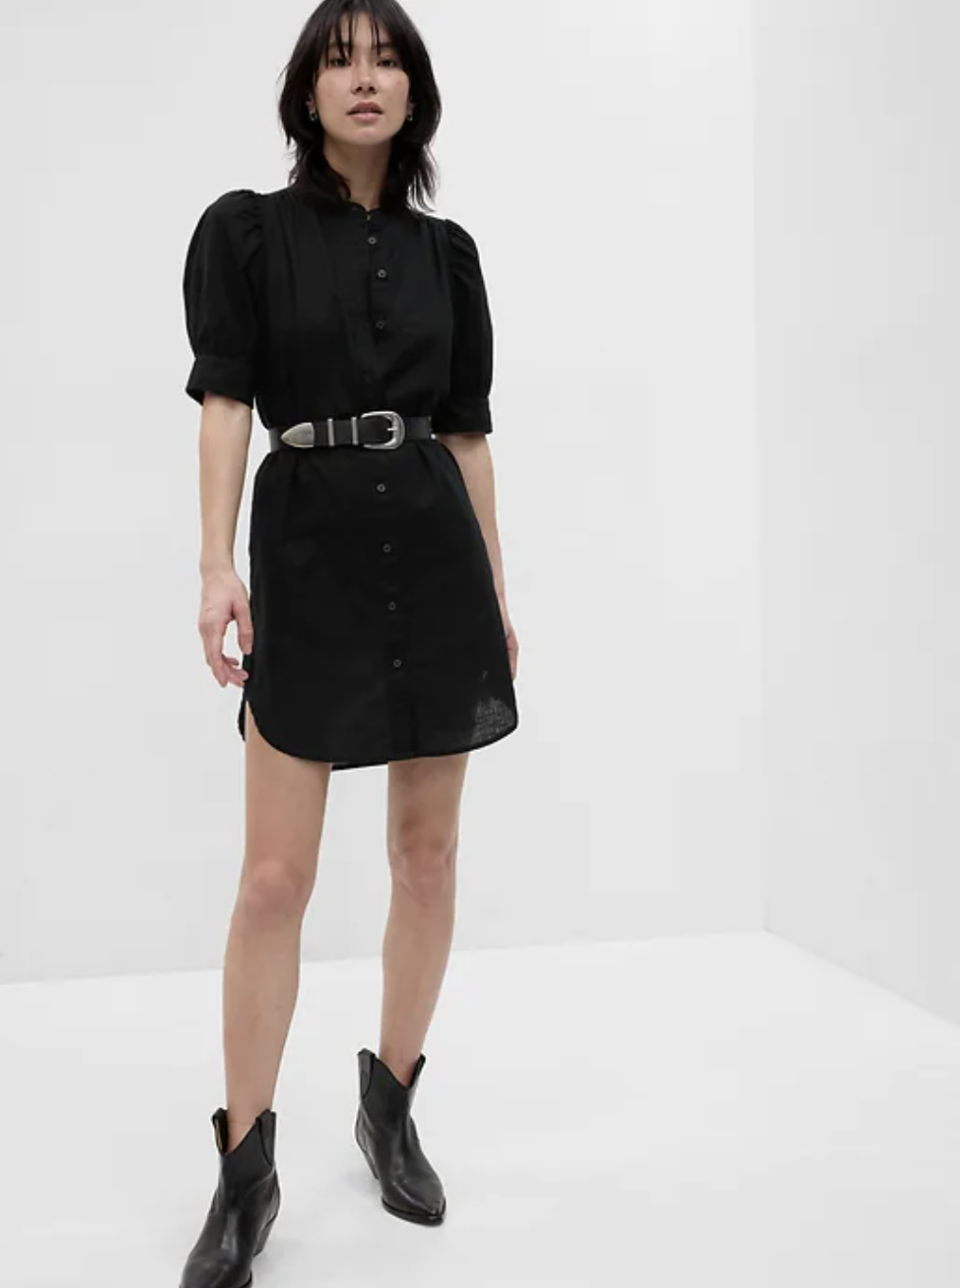 model wearing black cowboy boots and belted black Puff Sleeve Linen-Cotton Shirtdress (photo via Gap)